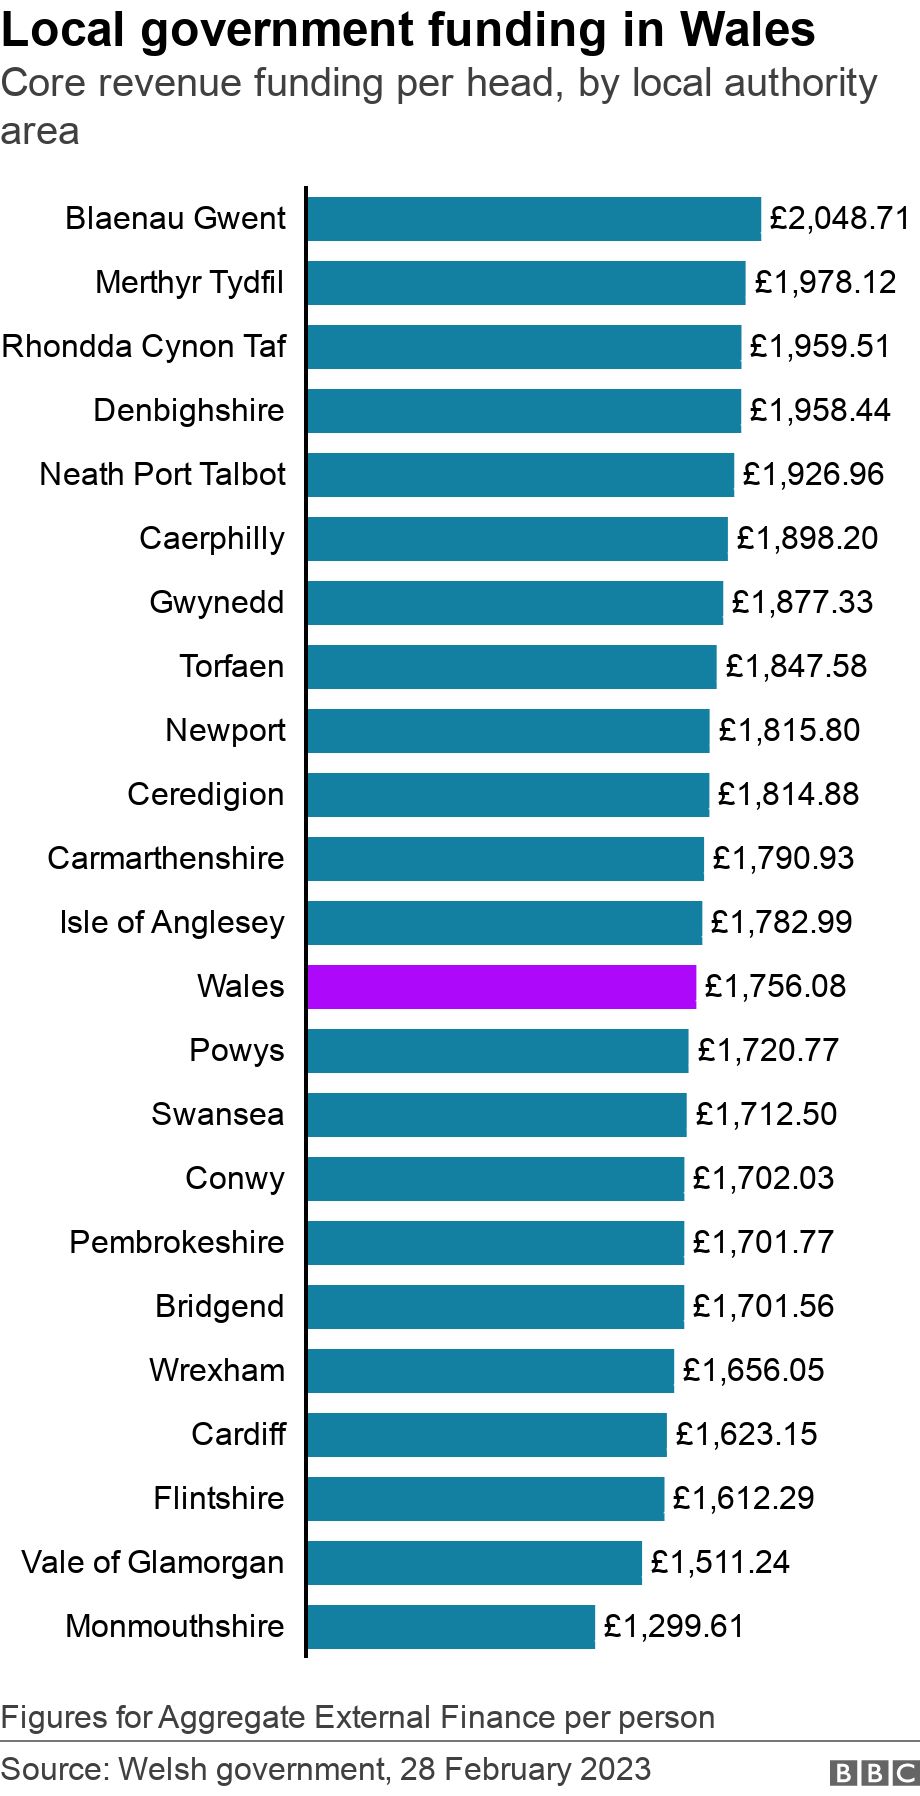 graph showing local government funding in Wales